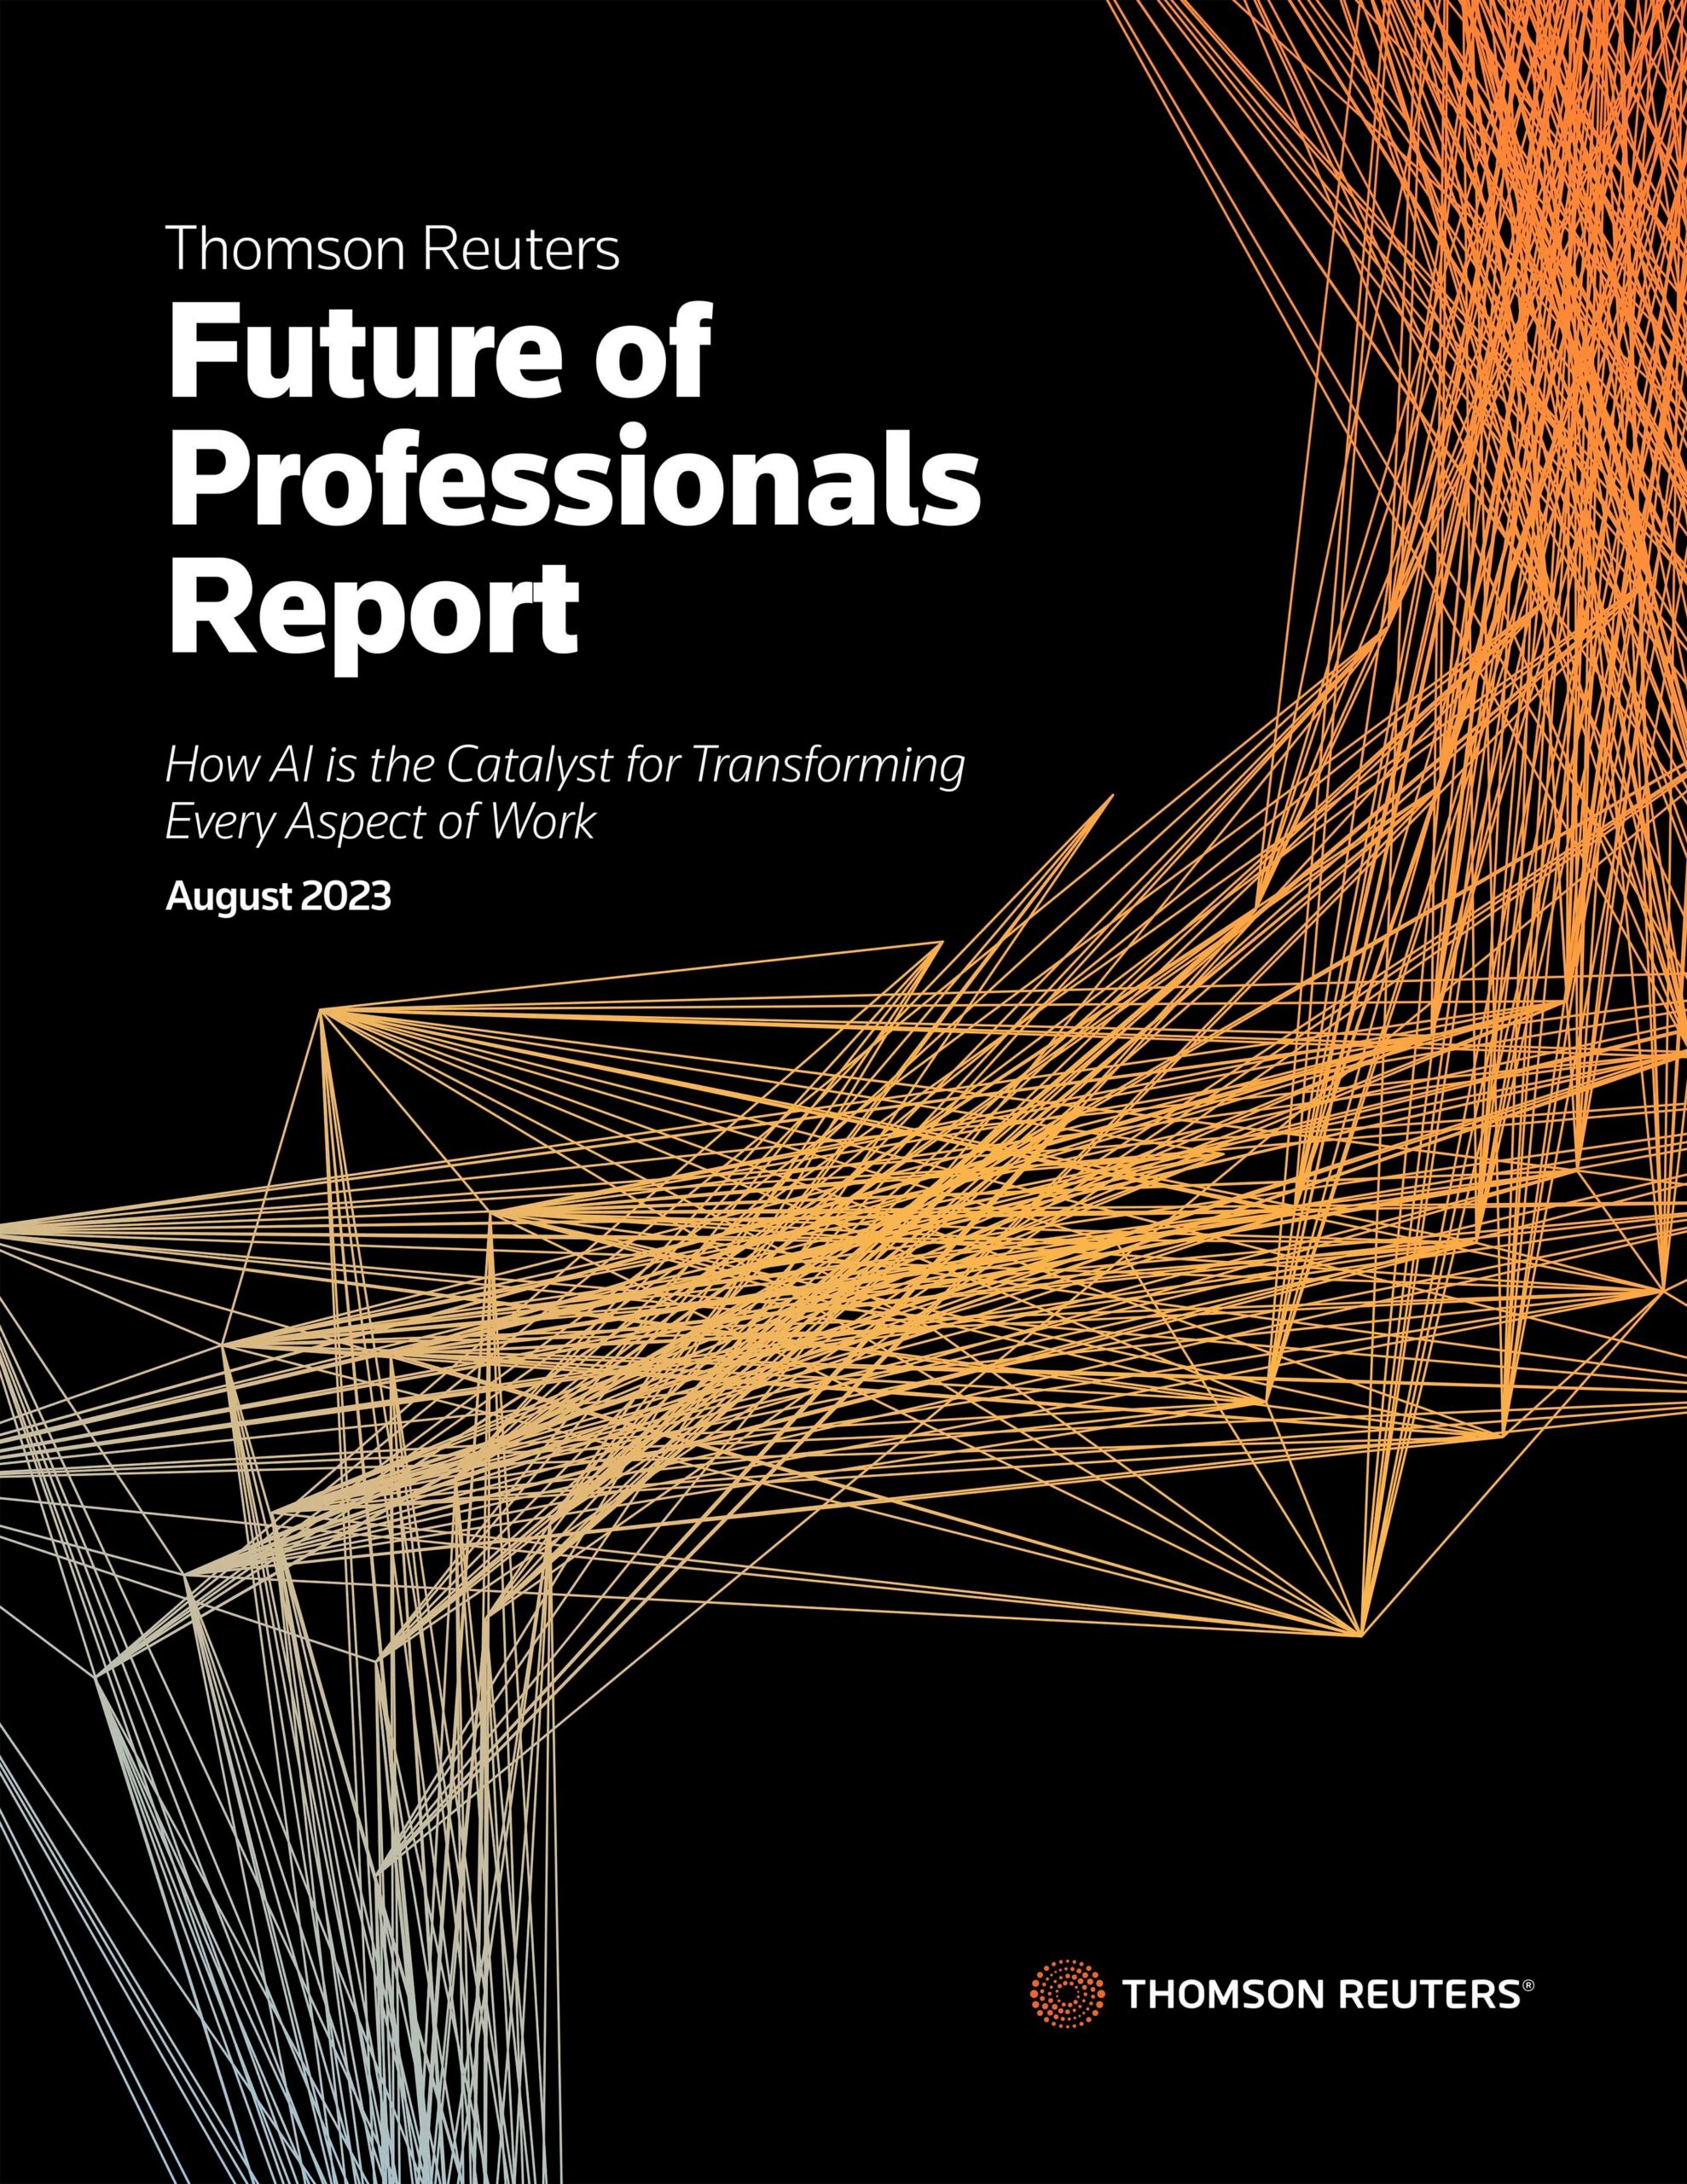 Future of Professionals Report: How AI is the catalyst for transforming every aspect of work